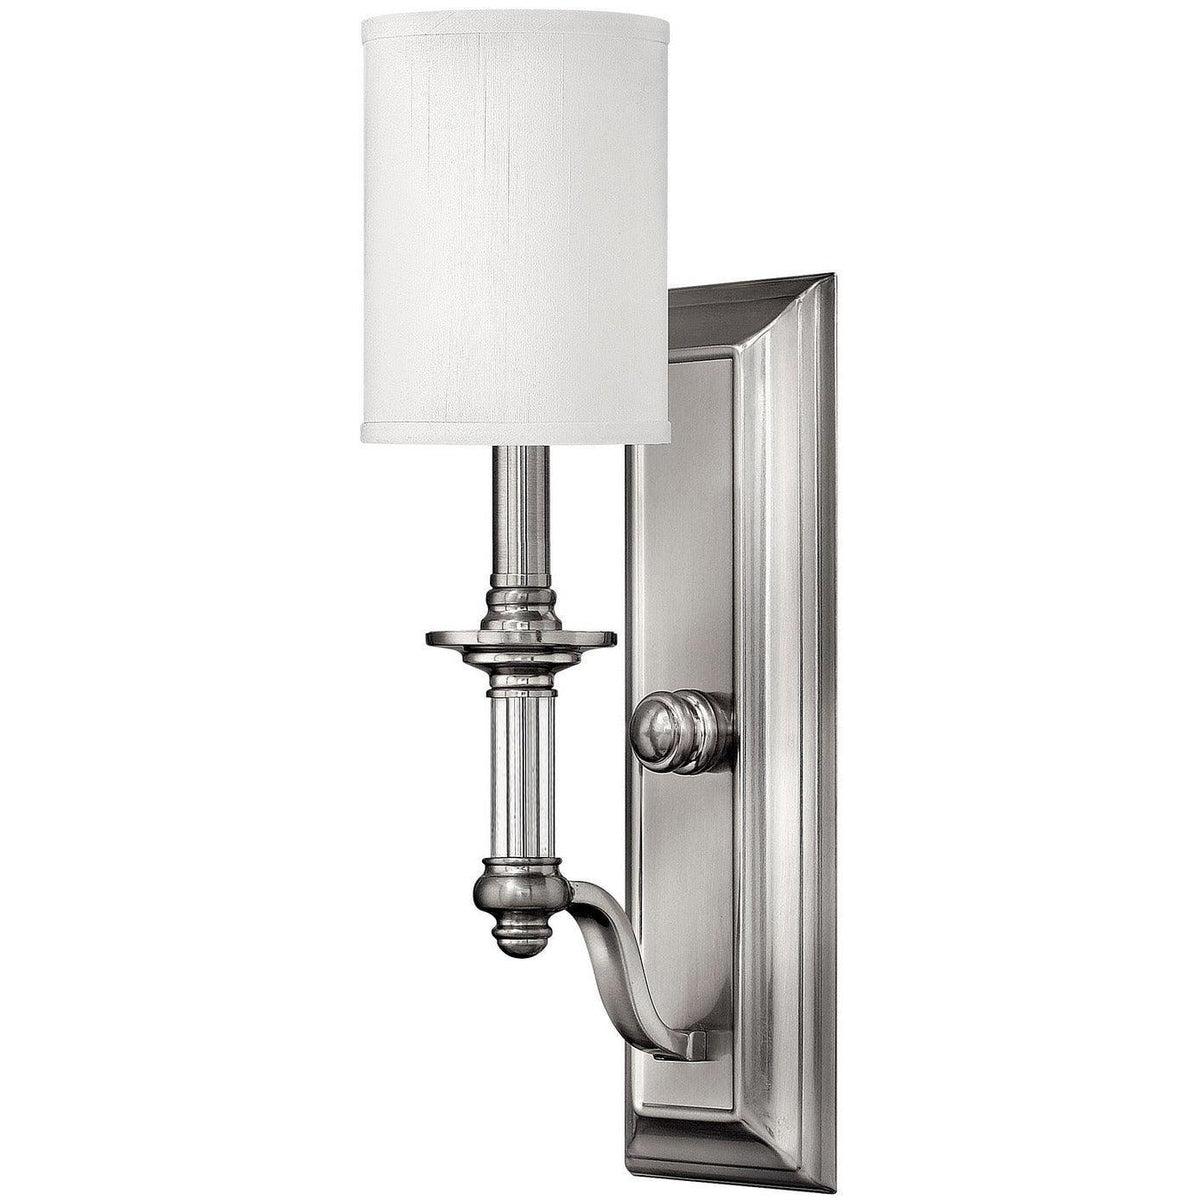 Hinkley Lighting - Sussex 18-Inch Wall Sconce - 4790BN | Montreal Lighting & Hardware